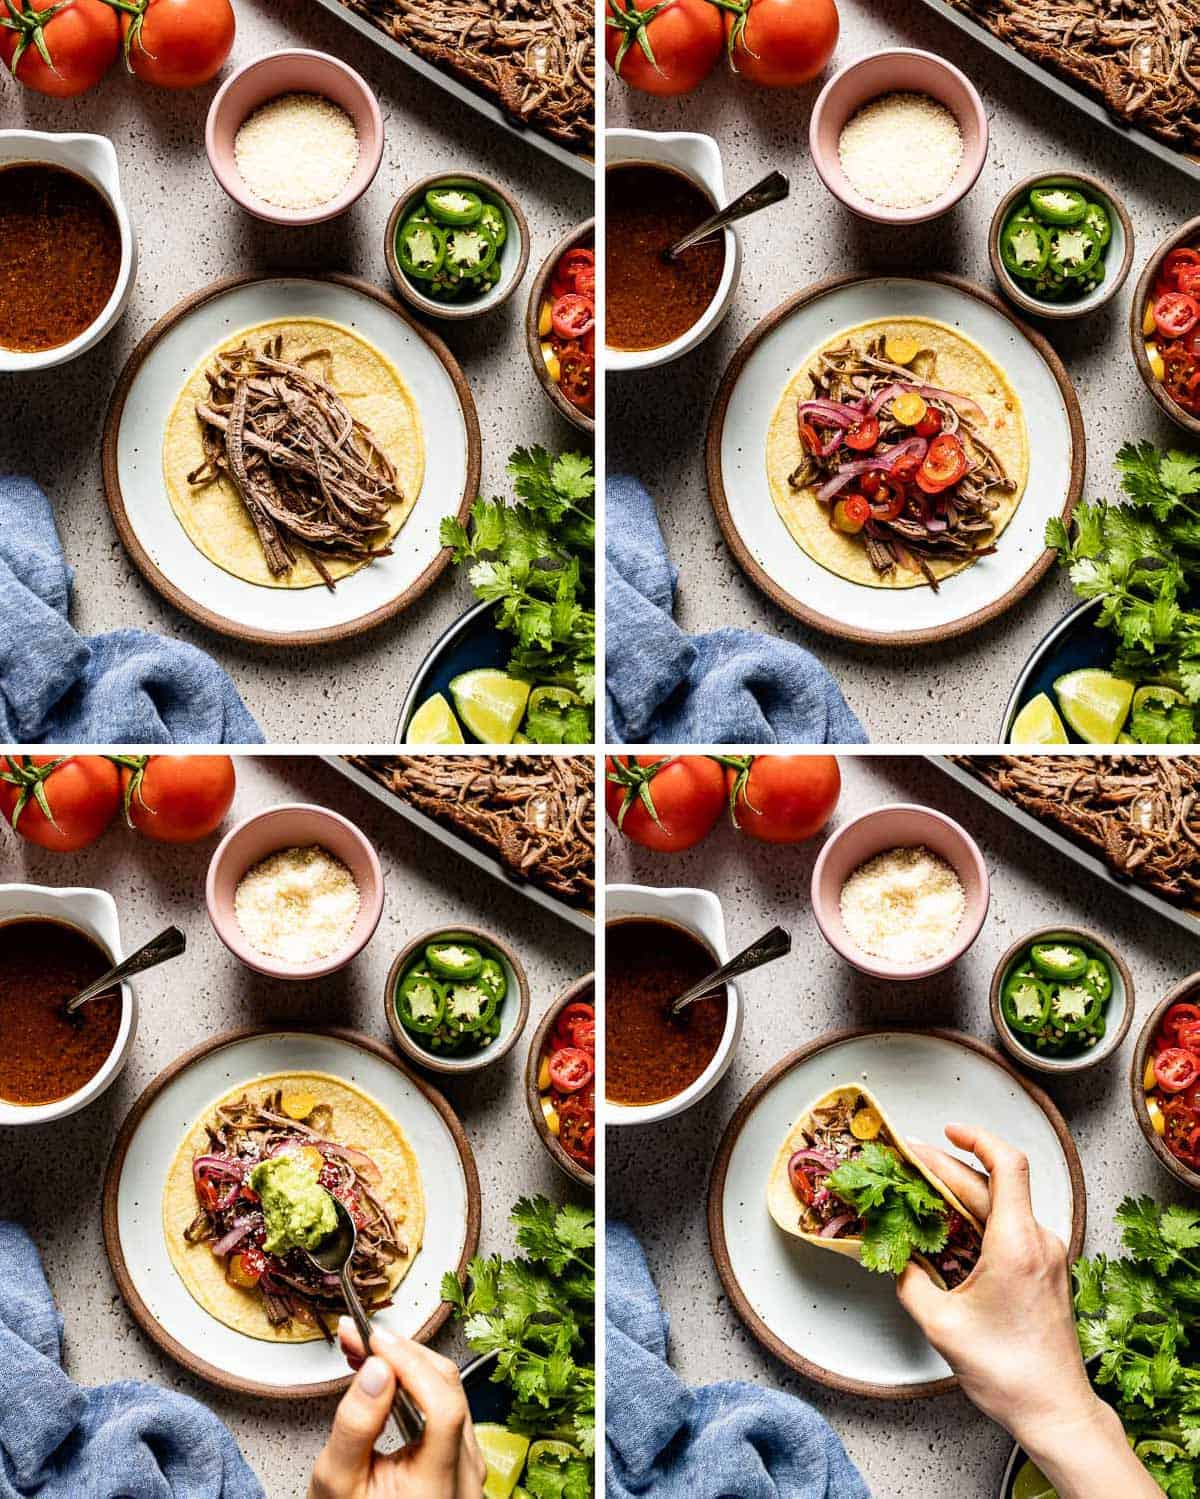 A group of images showing how to make brisket tacos with the toppings.